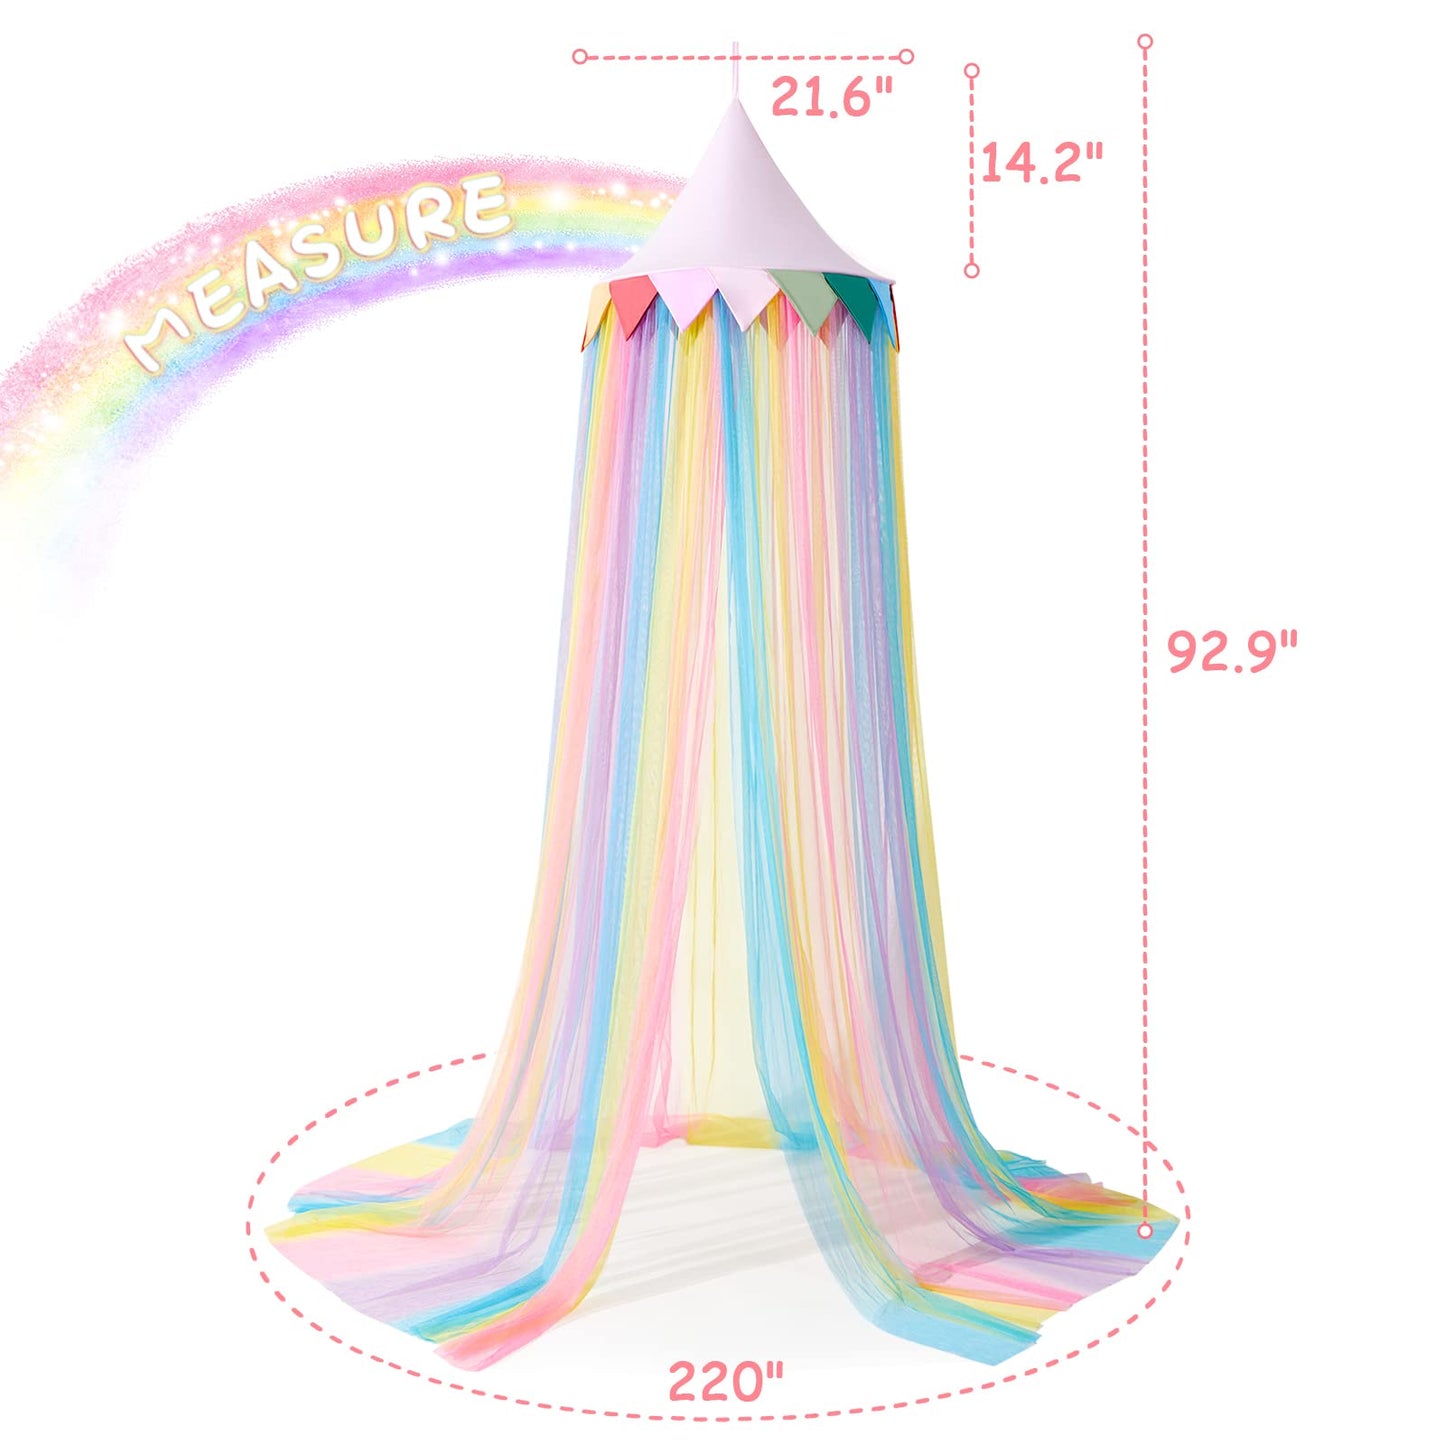 MOOZHEALTH Bed Canopy for Girls Kids Princess Round Dome Dreamy Hanging Net Canopy Rainbow Bright Bed Canopy for Girls Kids Bedroom Decoration Children Reading Nook Play Tent Canopy